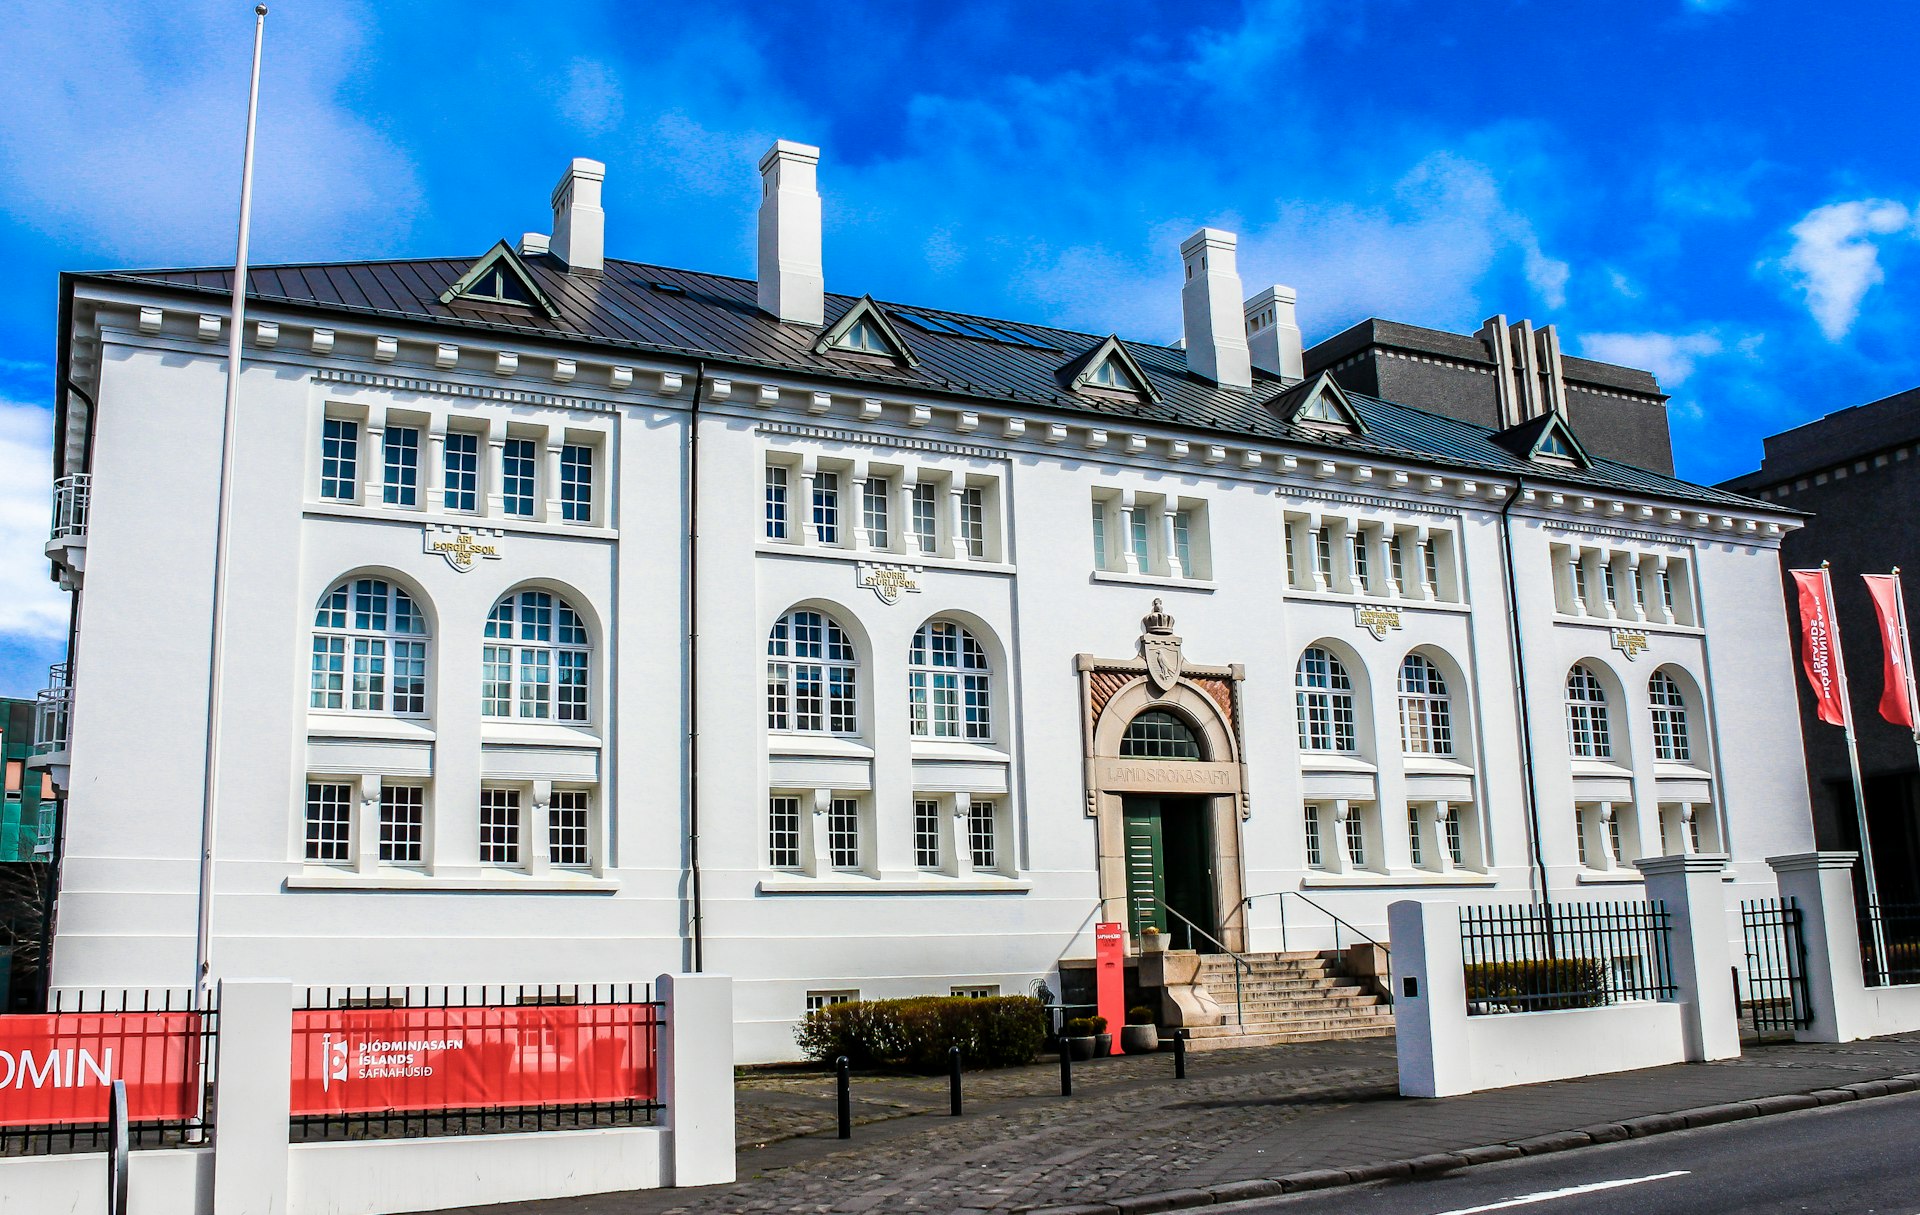 The House of Collections, a large white building with arched windows and one central door, sits on a street in Reykjavík